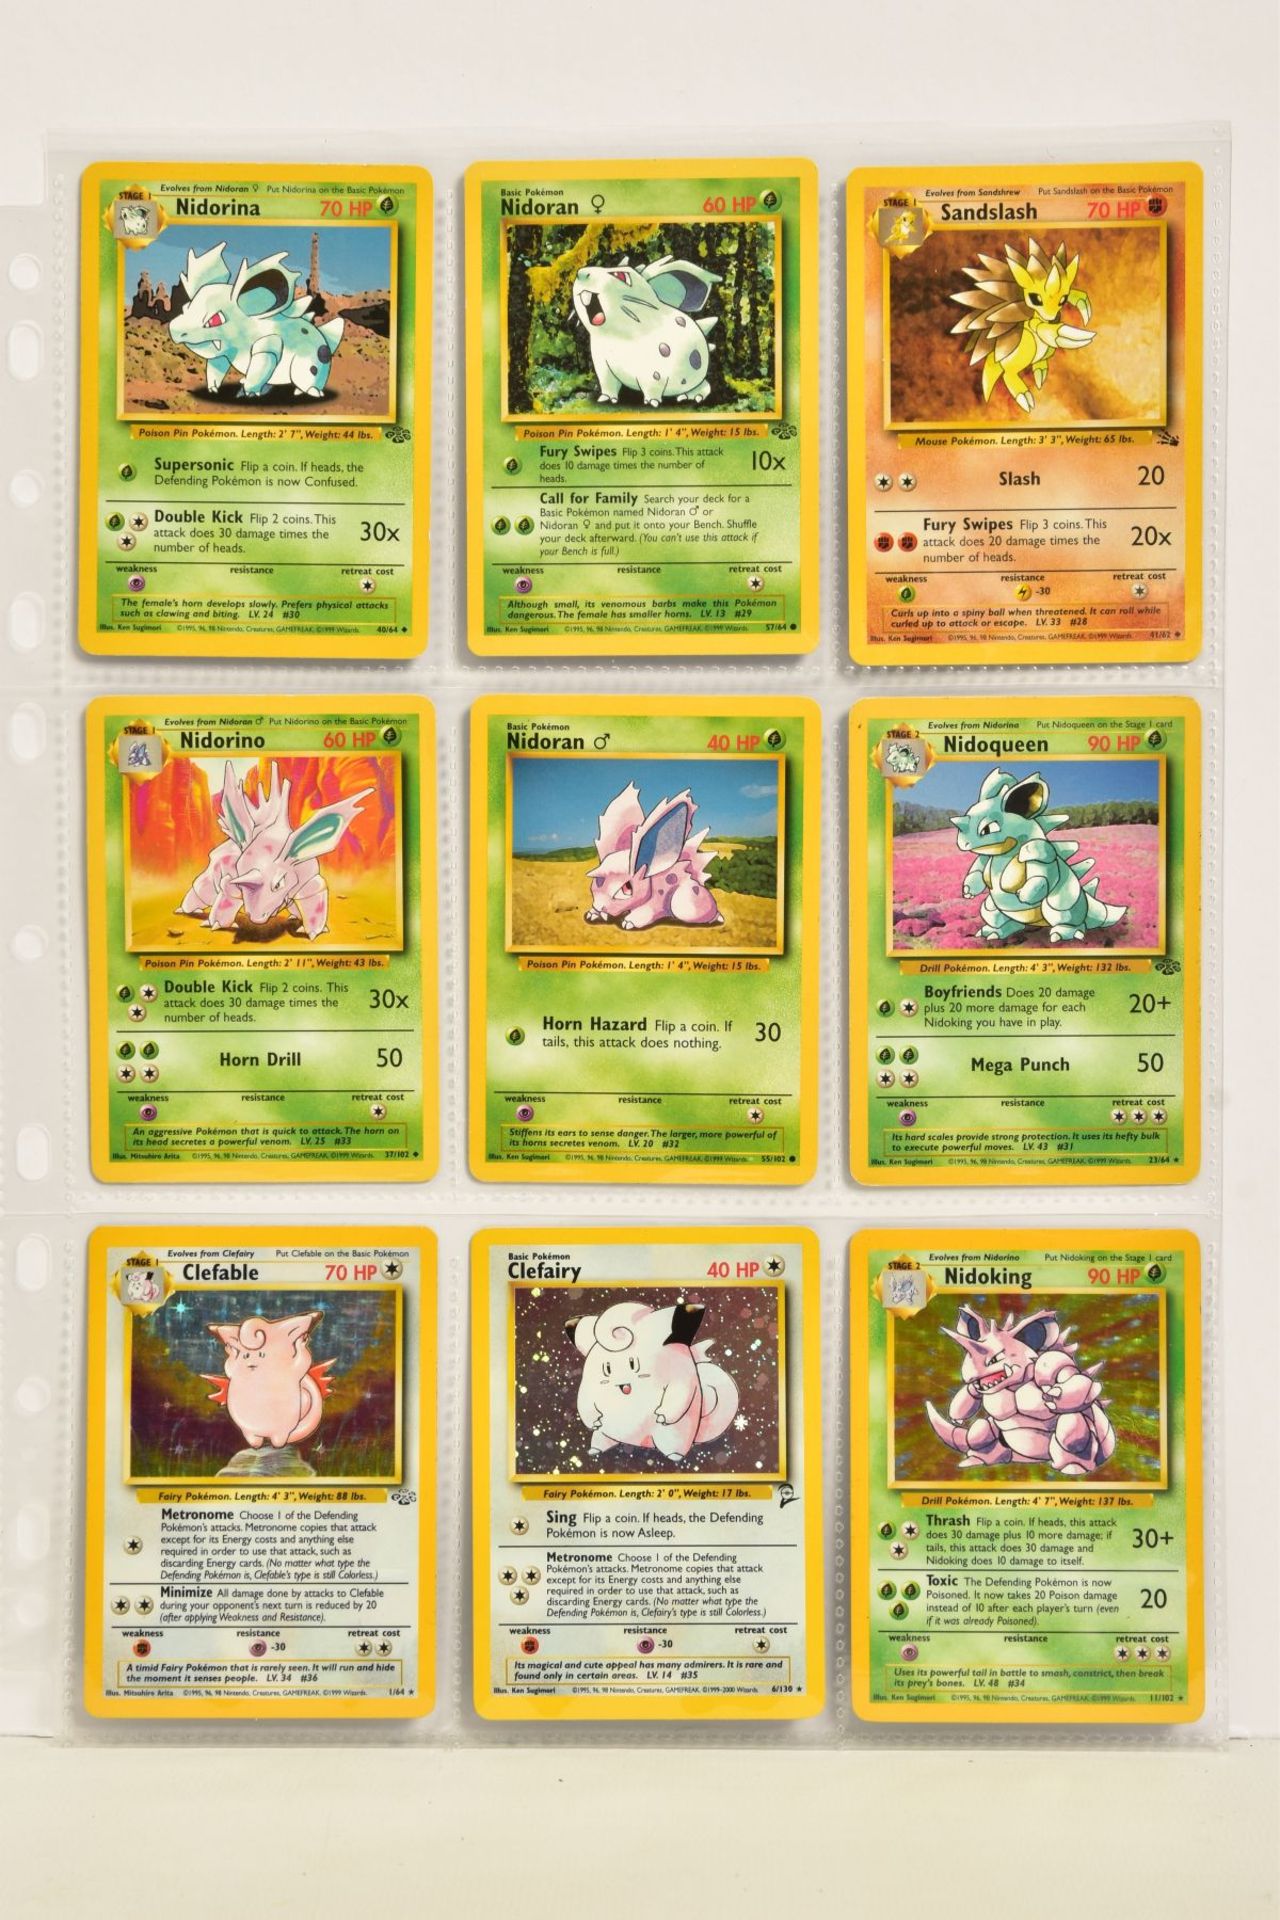 POKEMON THE TRADING CARD GAME 154 CARDS IN POKEMON TCG FOLDER, includes one of each of the - Image 5 of 20